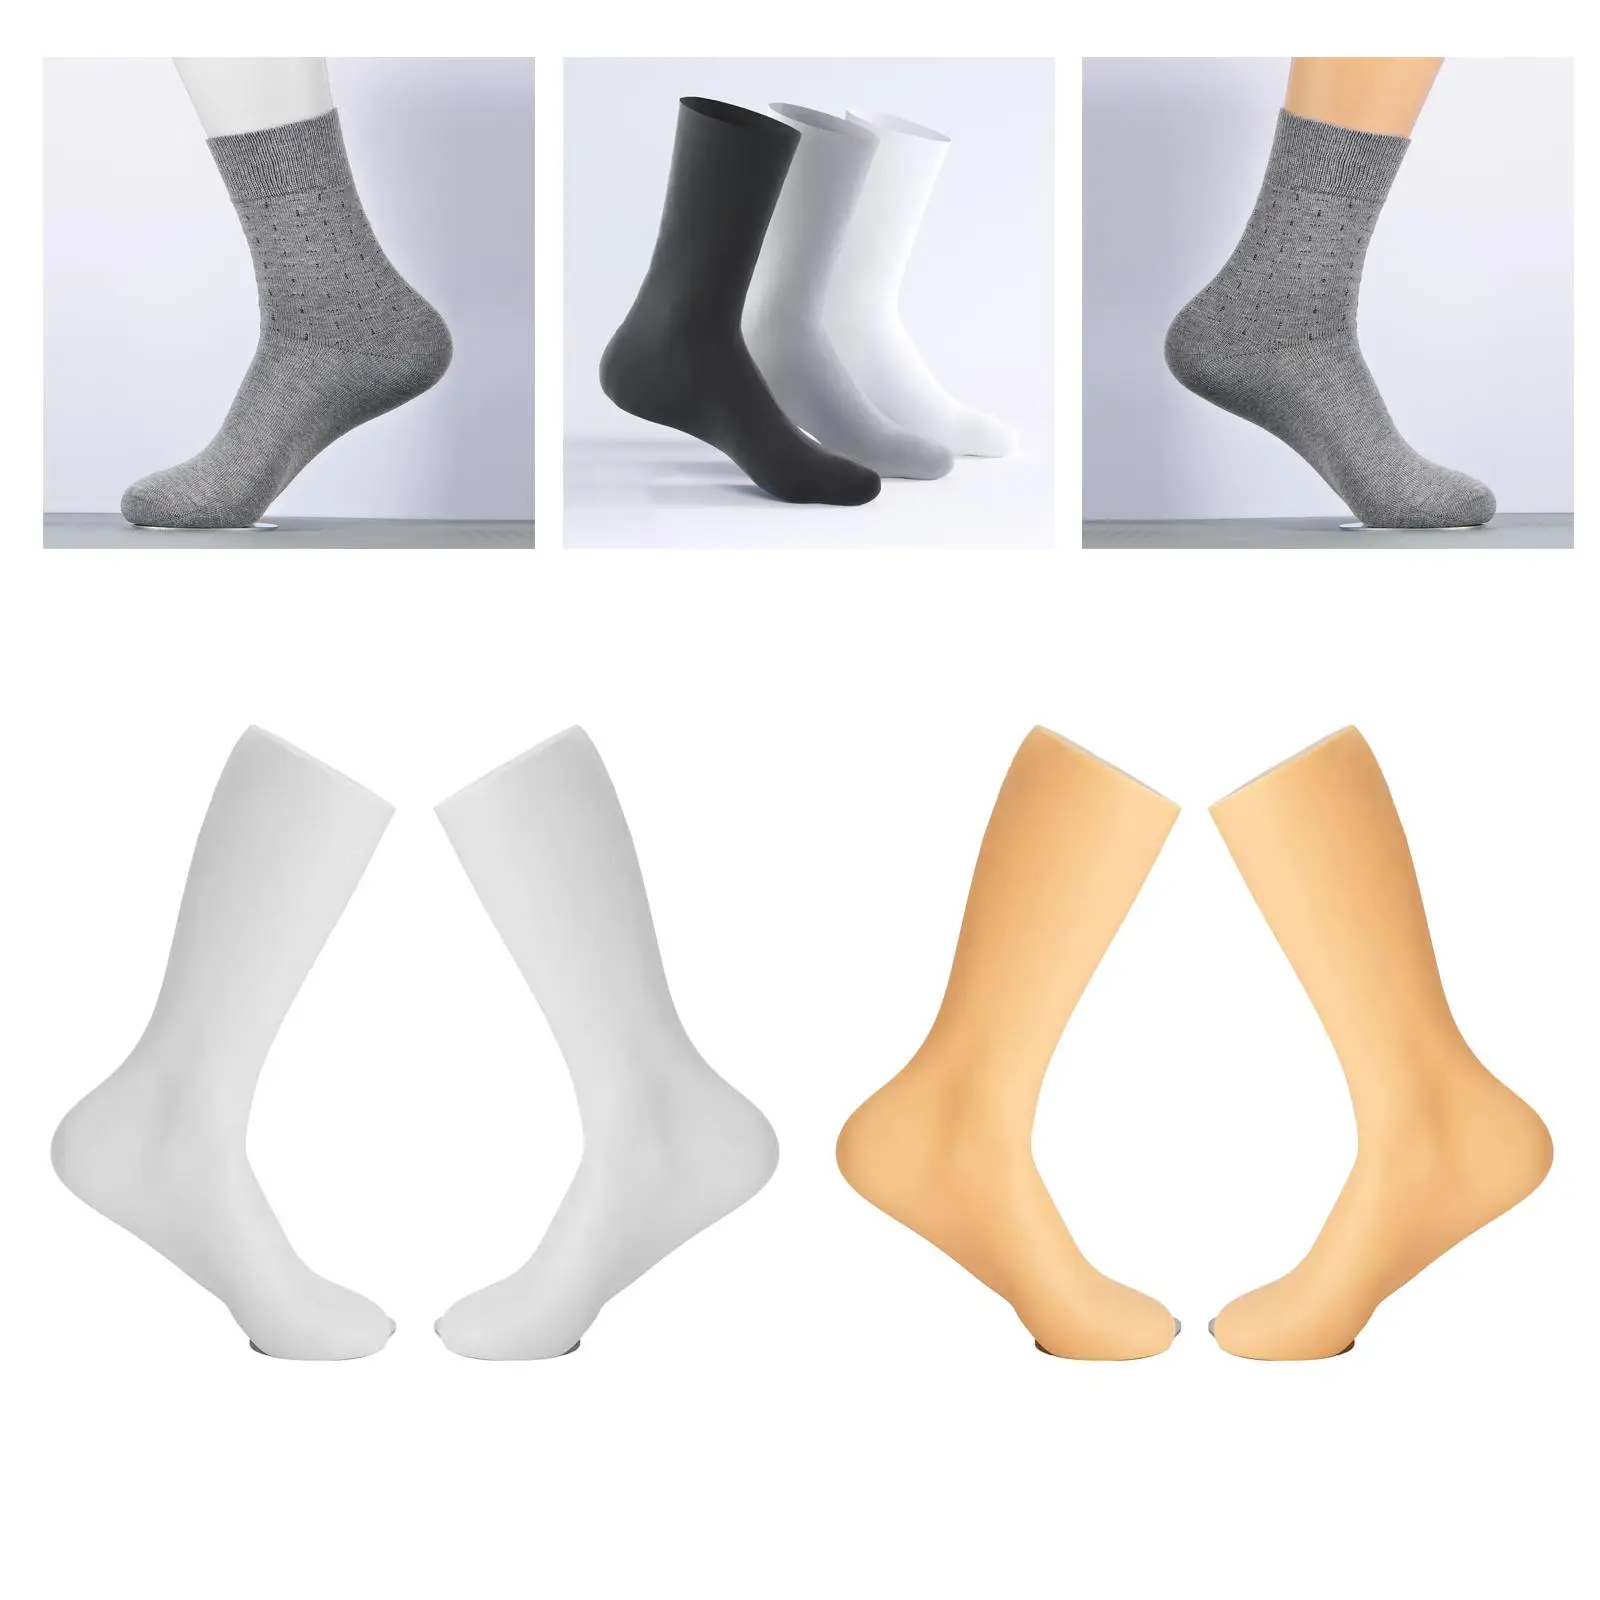 Male Legs Feet Foot Mannequin Sock Display Stand Reusable Foot Toys Durable Stretcher for Showcase Store Commercial Business Men